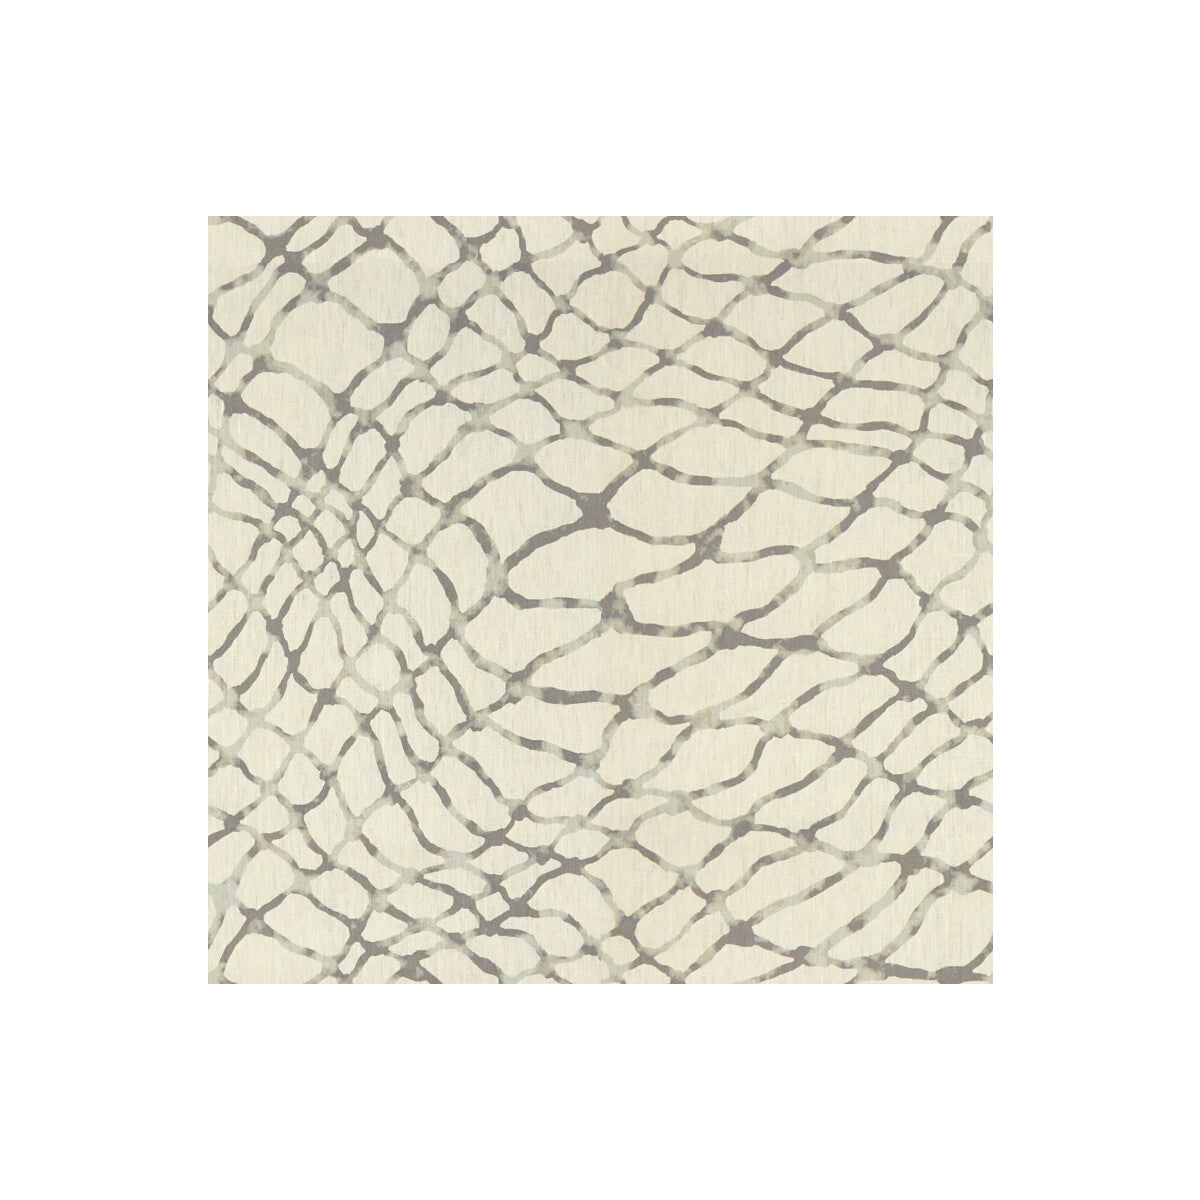 Waterpolo fabric in stone color - pattern WATERPOLO.11.0 - by Kravet Basics in the Jeffrey Alan Marks Waterside collection